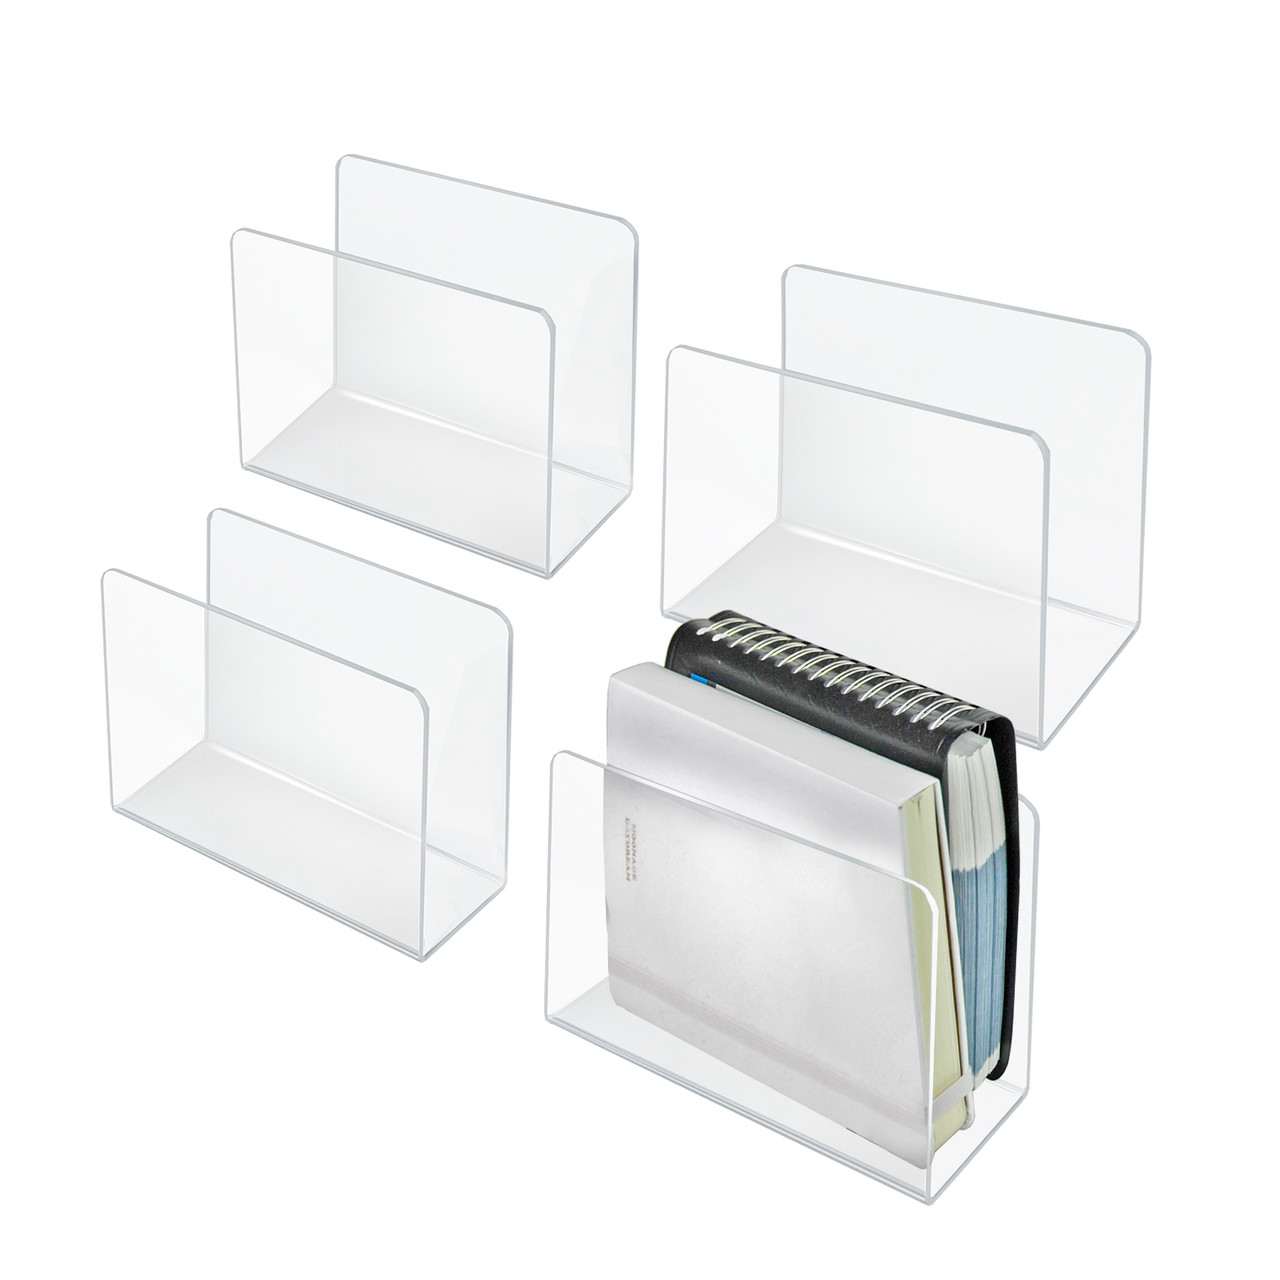  40 Pack Clear Badge Holder 3.5 X 2.5 Inch Plastic